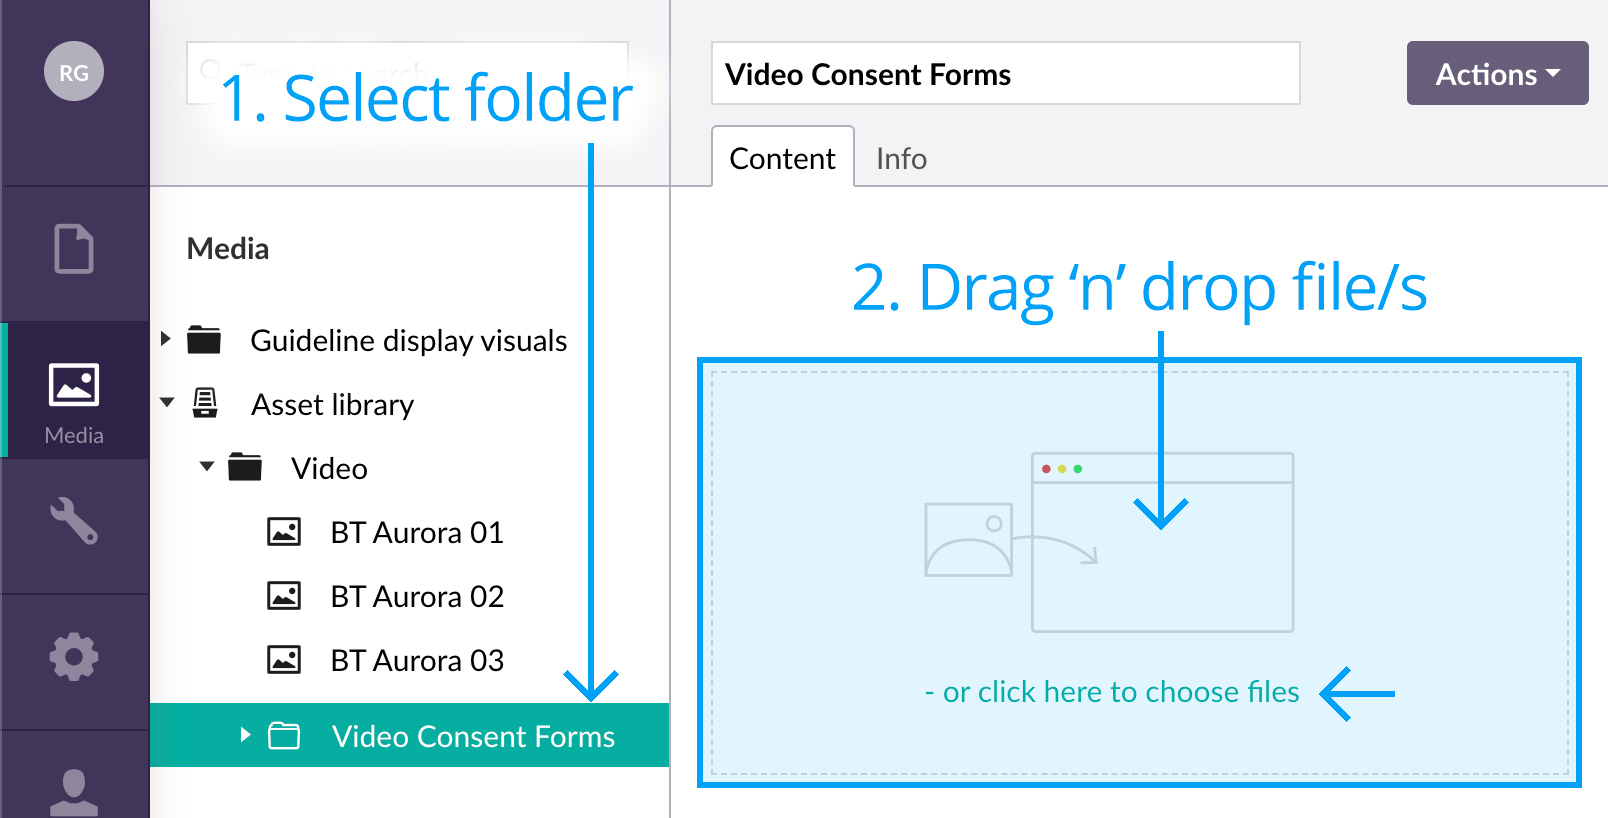 Drag and drop photo consent forms